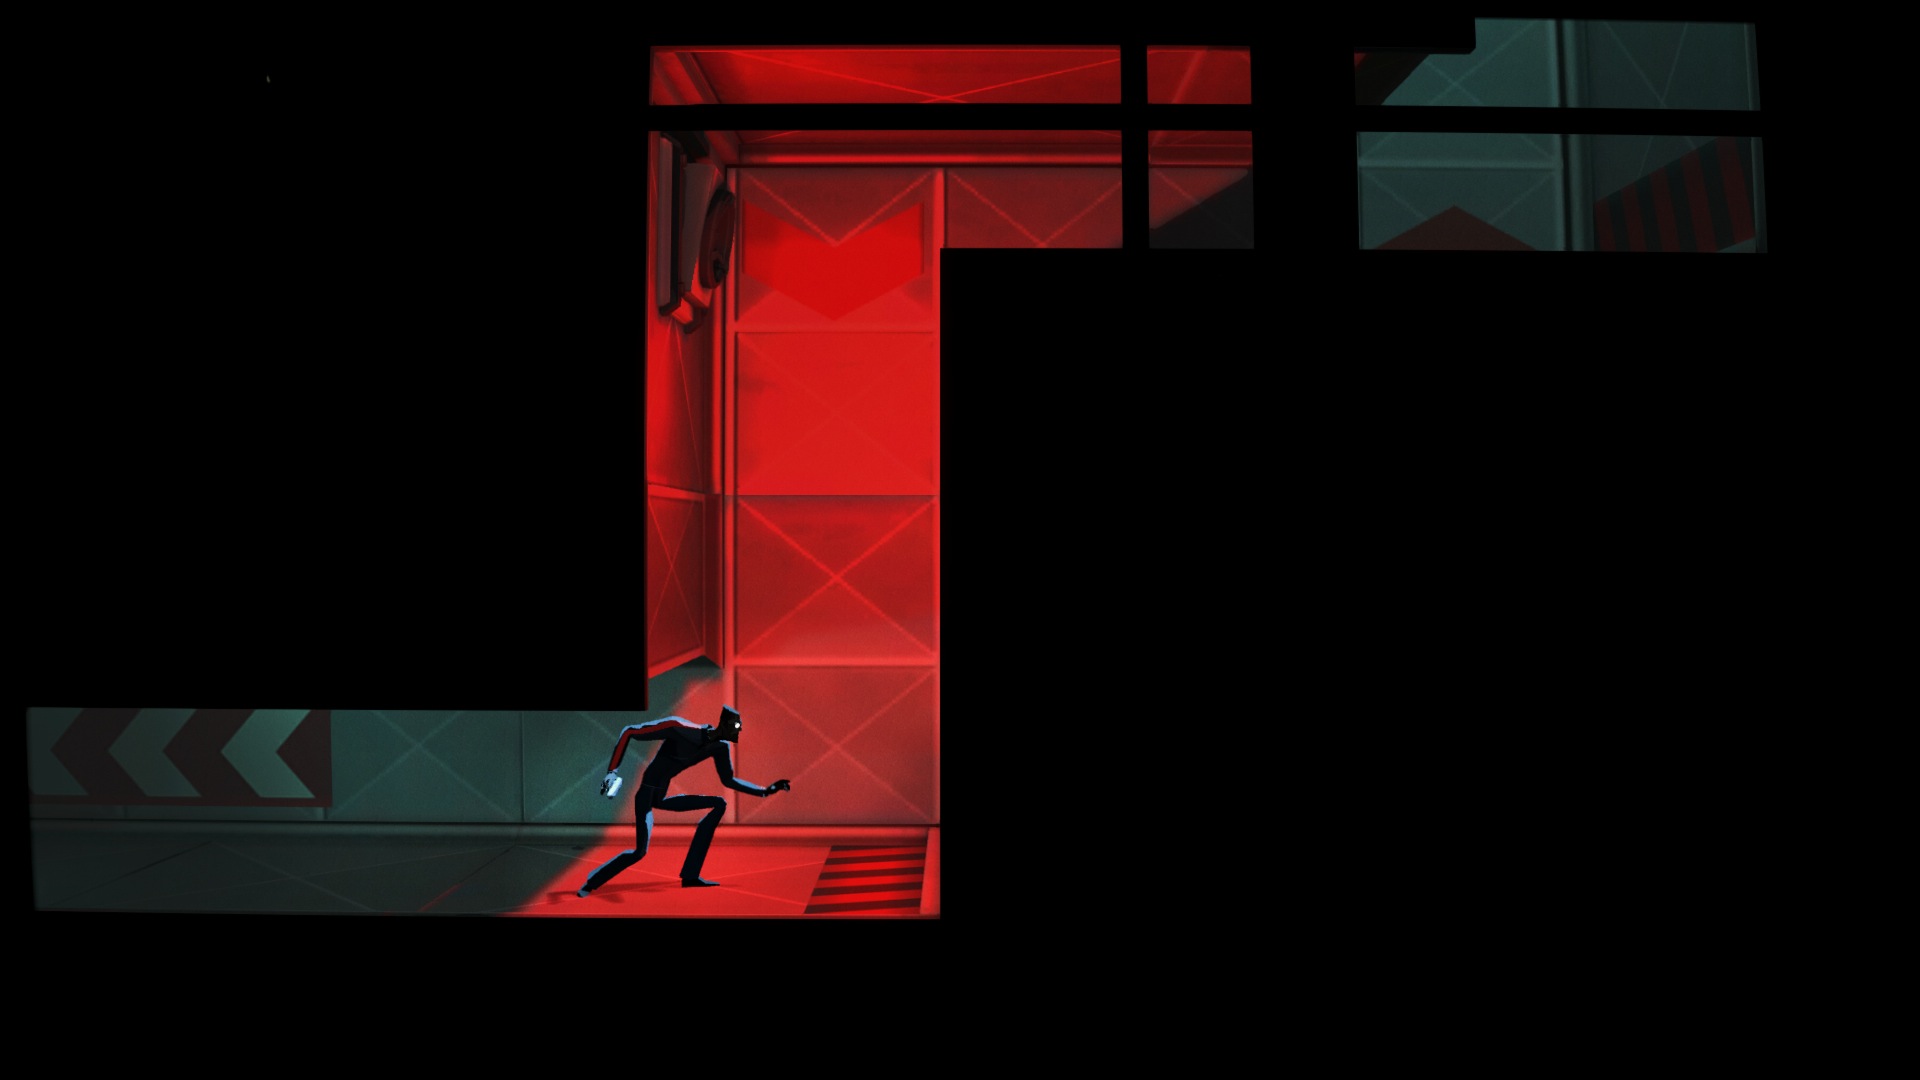 CounterSpy #2